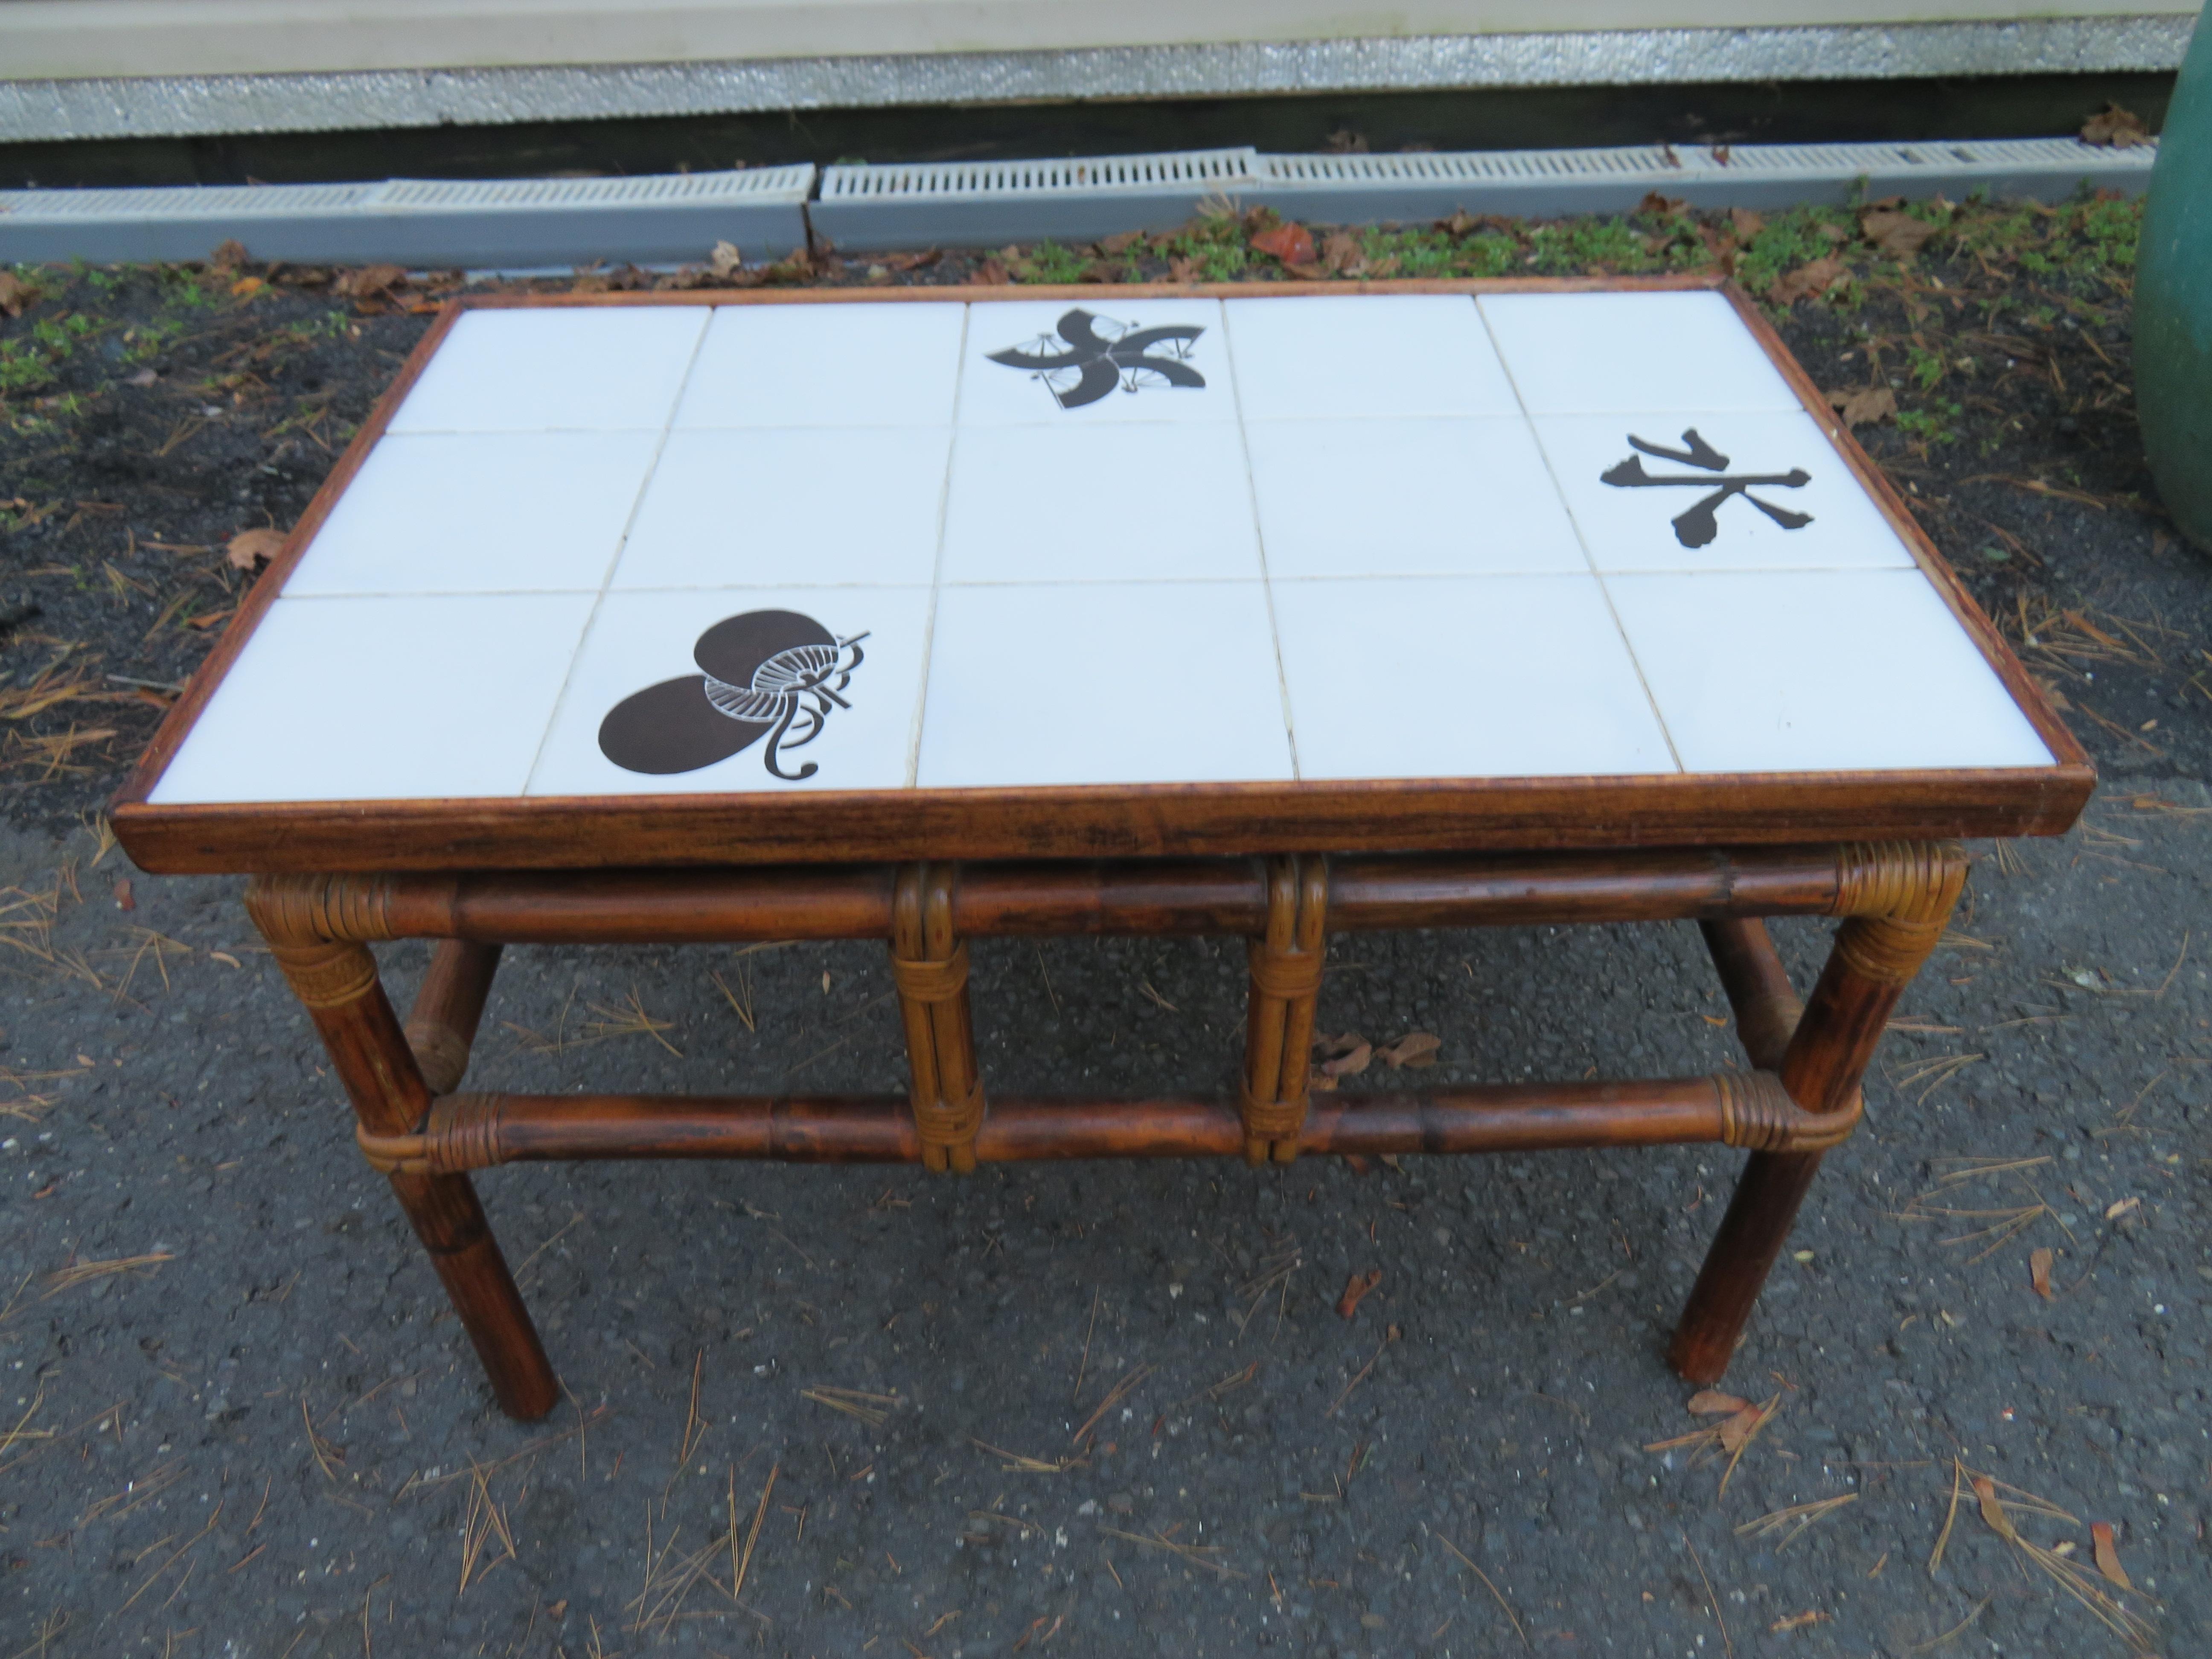 Handsome John Wisner for Ficks Reed Asian modern tile top side table. This piece features a white tile top framed with solid mahogany with applied Chinese character and fan decoration. The table is supported by a simple and classic stained bamboo